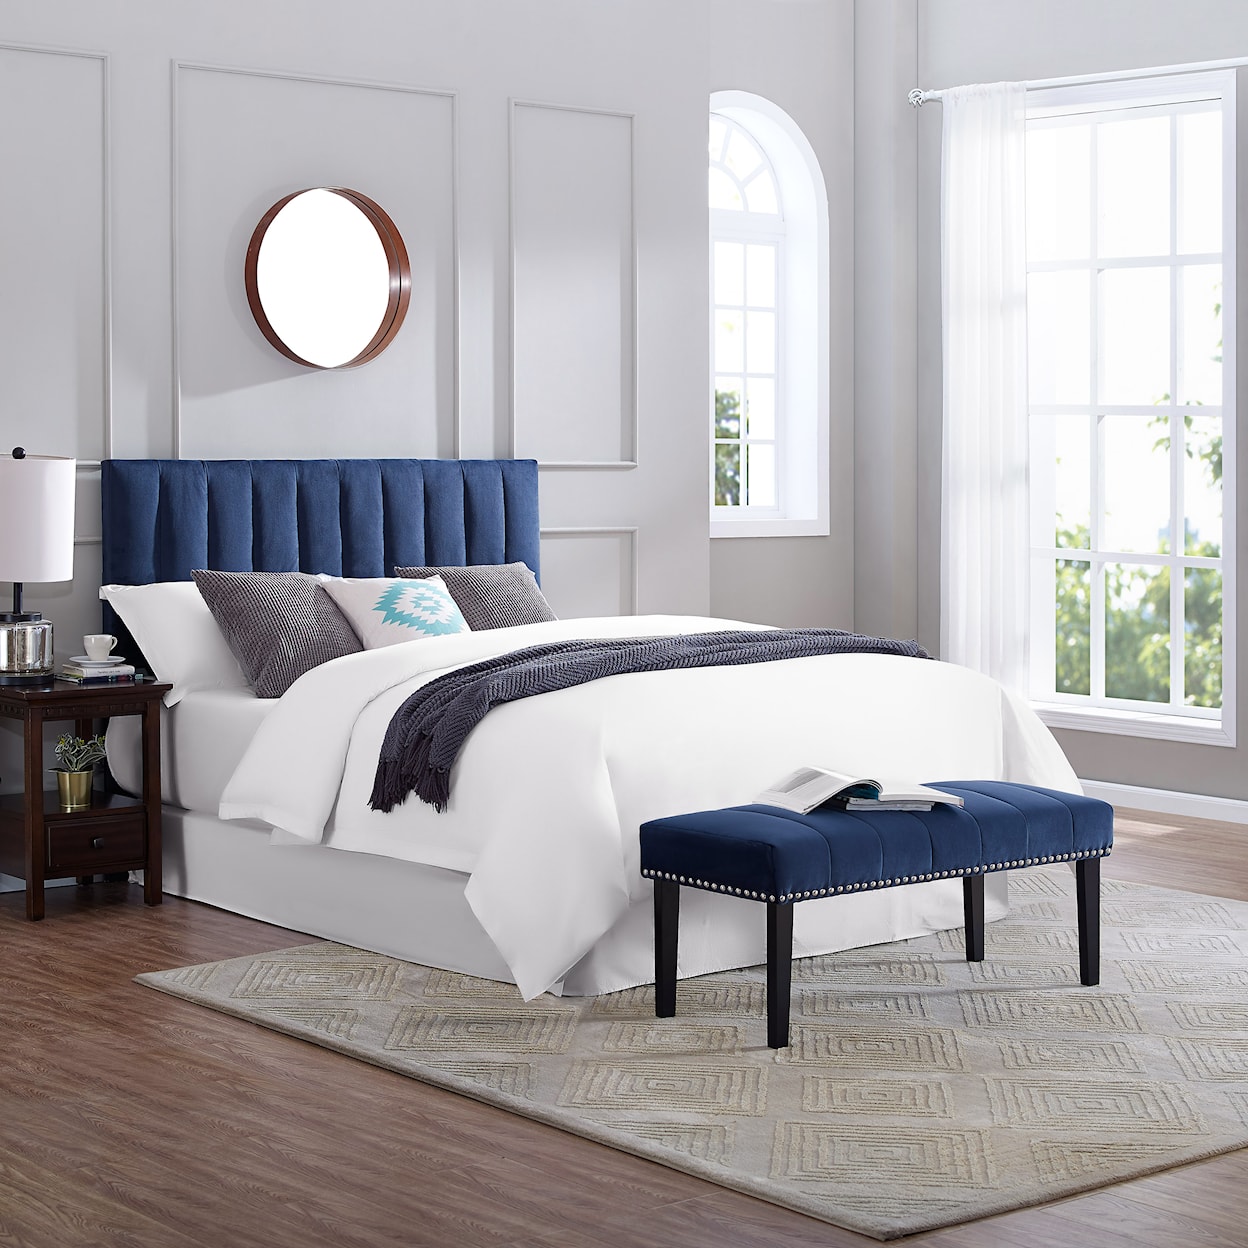 Accentrics Home Fashion Beds Full, Queen Upholstered Bed